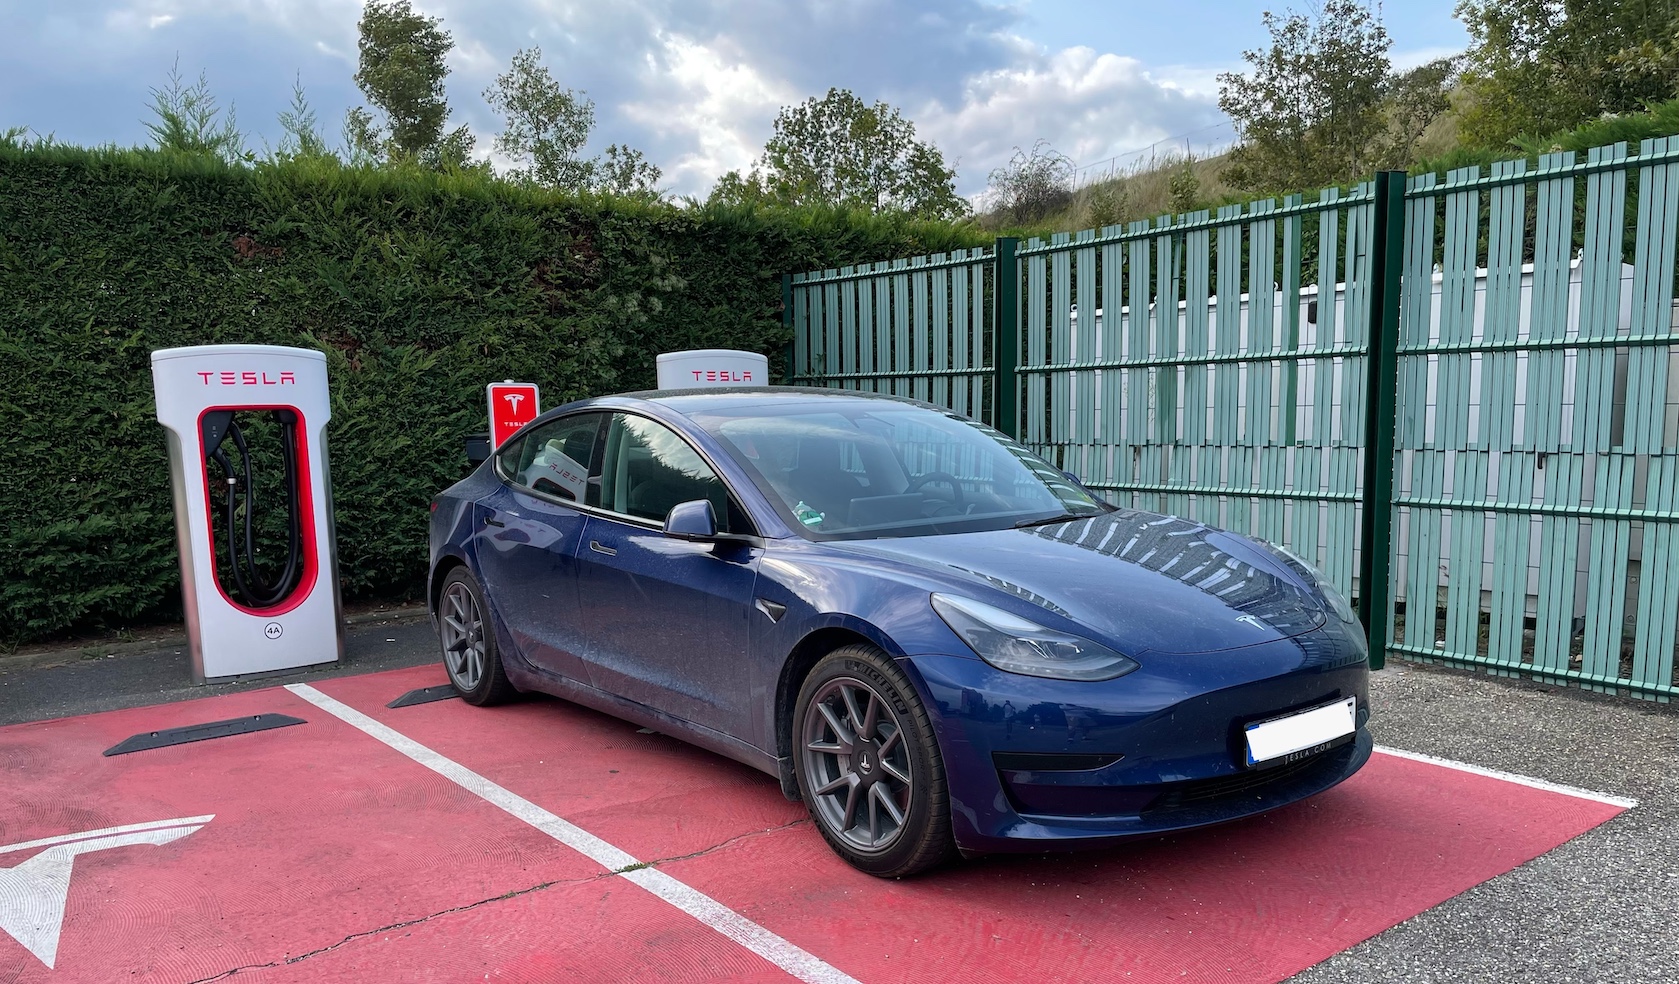 Supercharger in Vienne